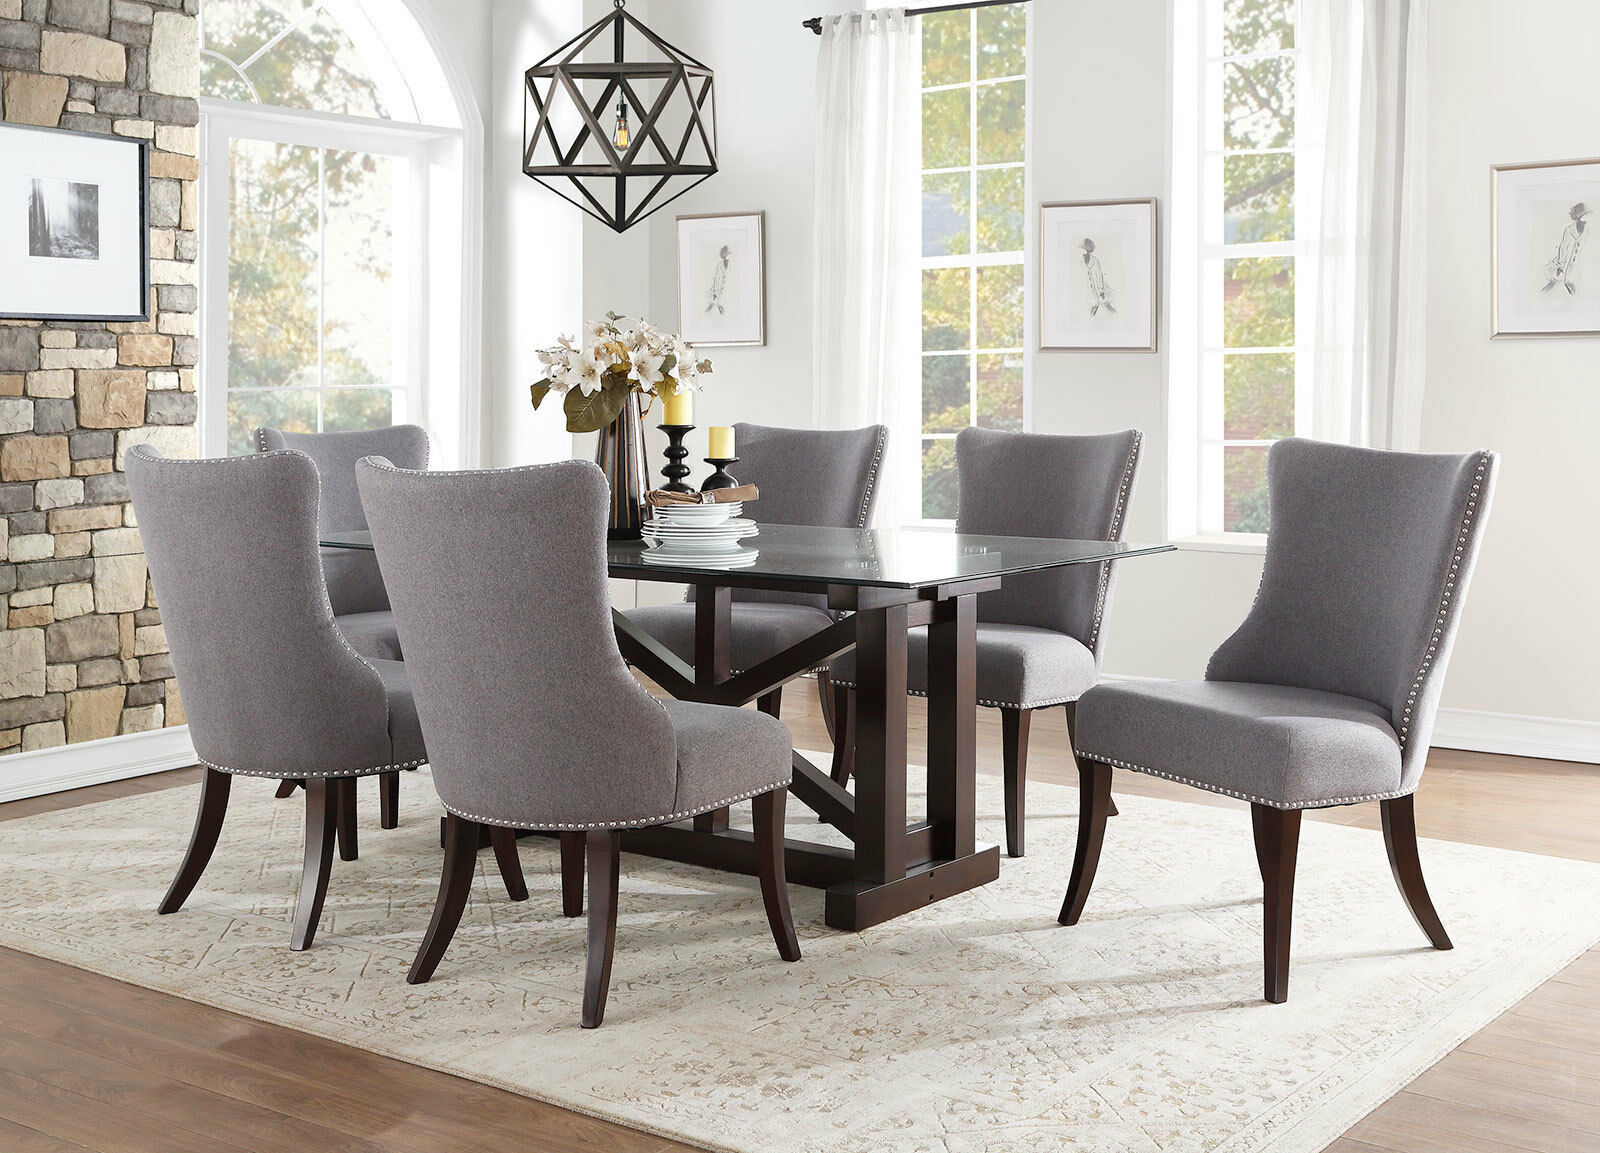 Dining Room Chairs For Glass Tables